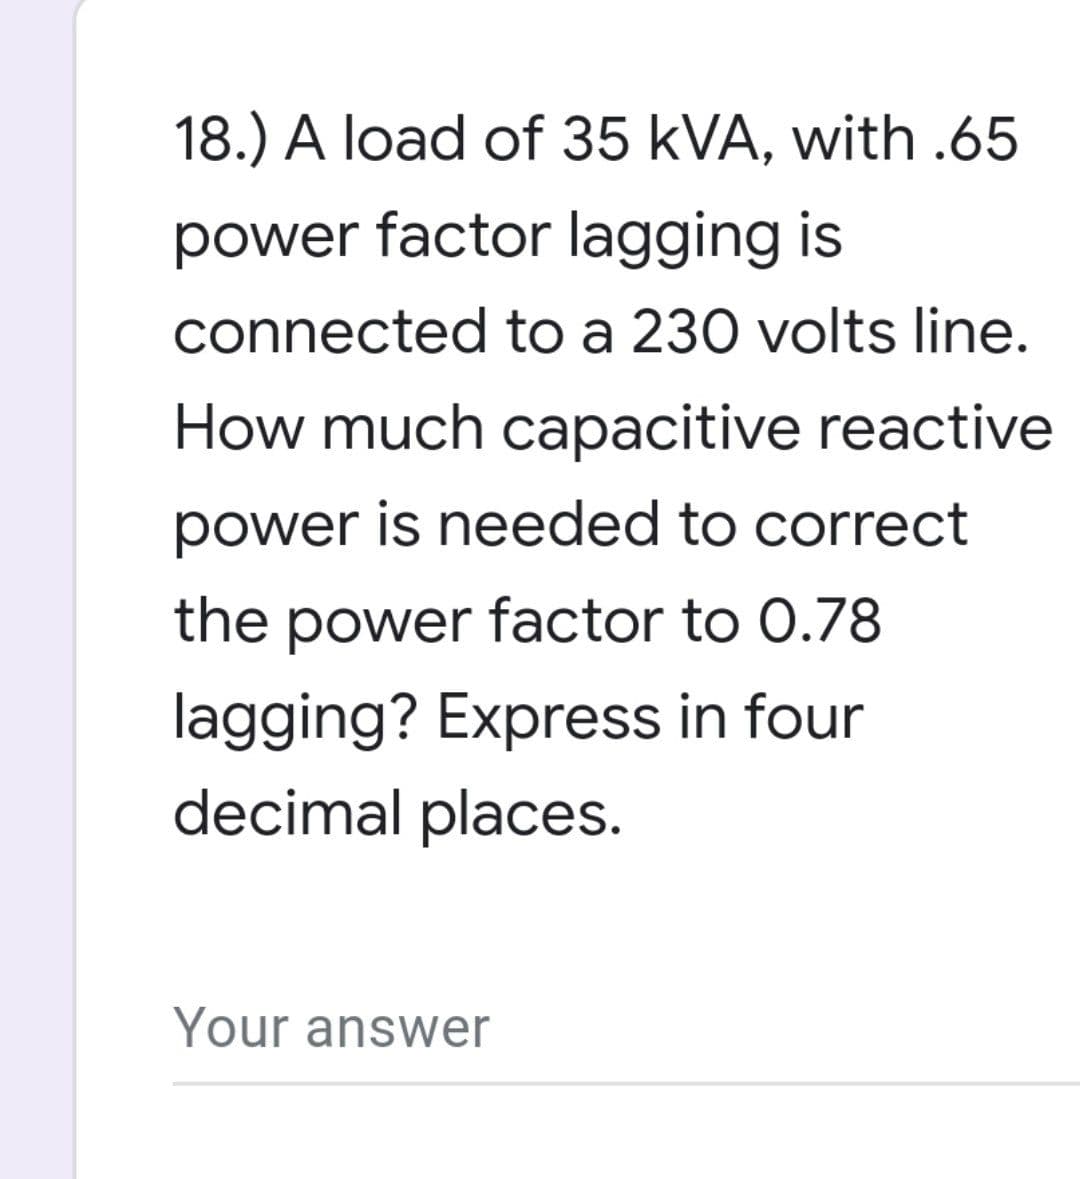 18.) A load of 35 kVA, with .65
power factor lagging is
connected to a 230 volts line.
How much capacitive reactive
power is needed to correct
the power factor to 0.78
lagging? Express in four
decimal places.
Your answer